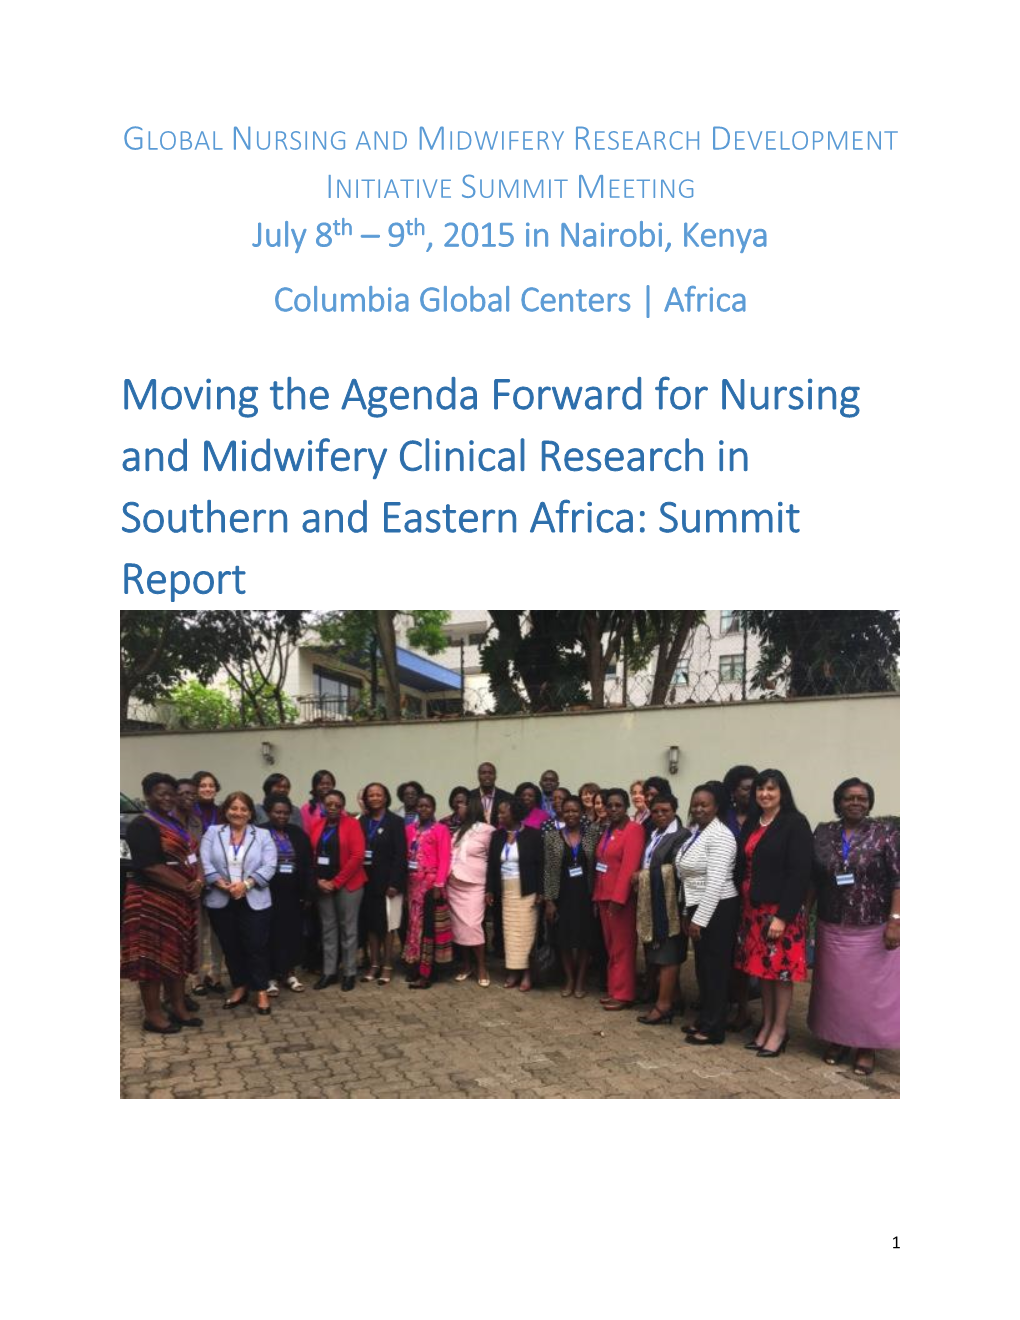 Moving the Agenda Forward for Nursing and Midwifery Clinical Research in Southern and Eastern Africa: Summit Report